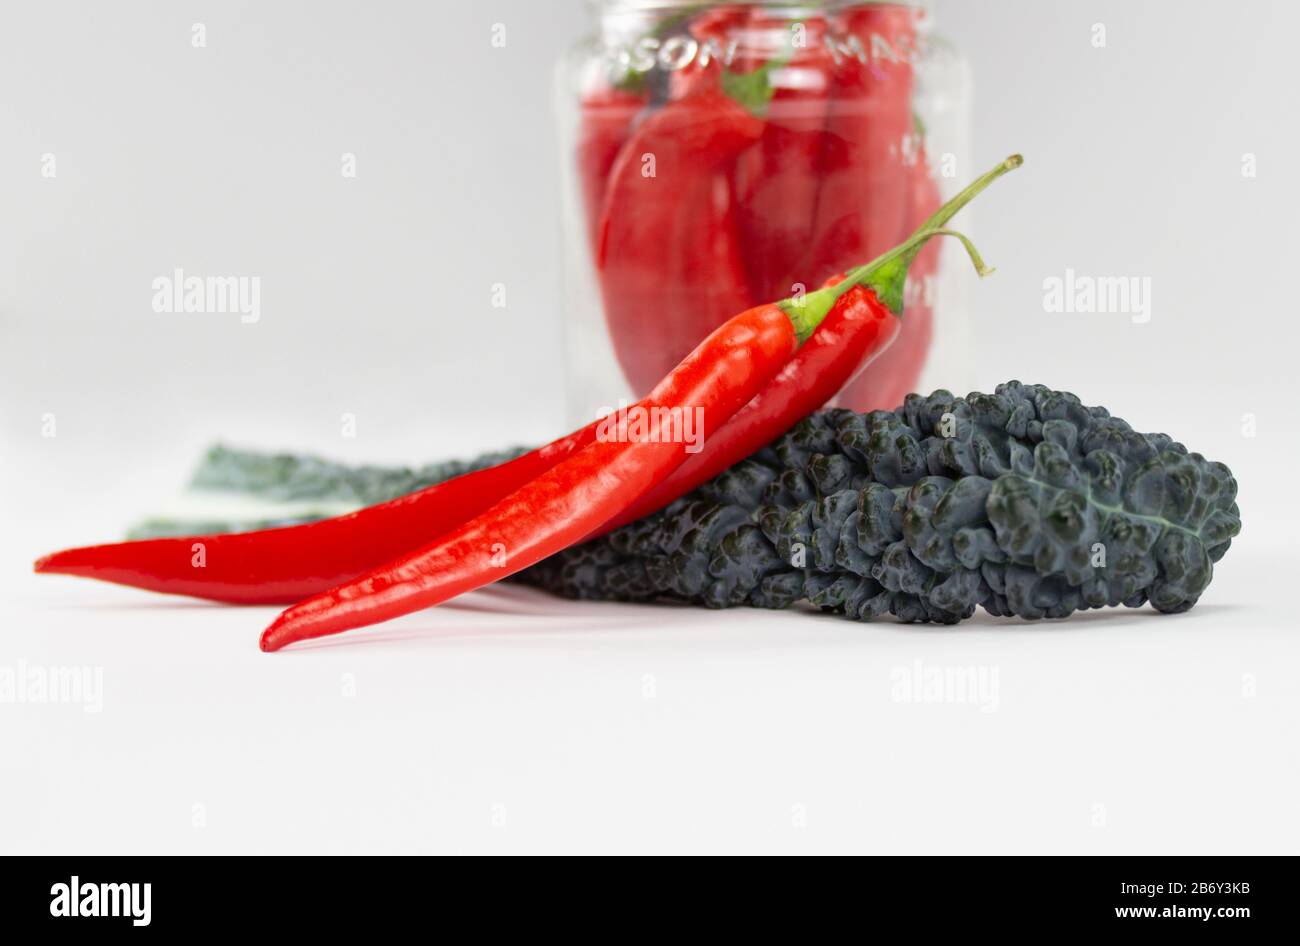 arrangement of red chili peppers and a lacinato kale leaf on white bakcground, also  called  dinosaur kale, flat kale, Tuscan kale or Italian kale Stock Photo